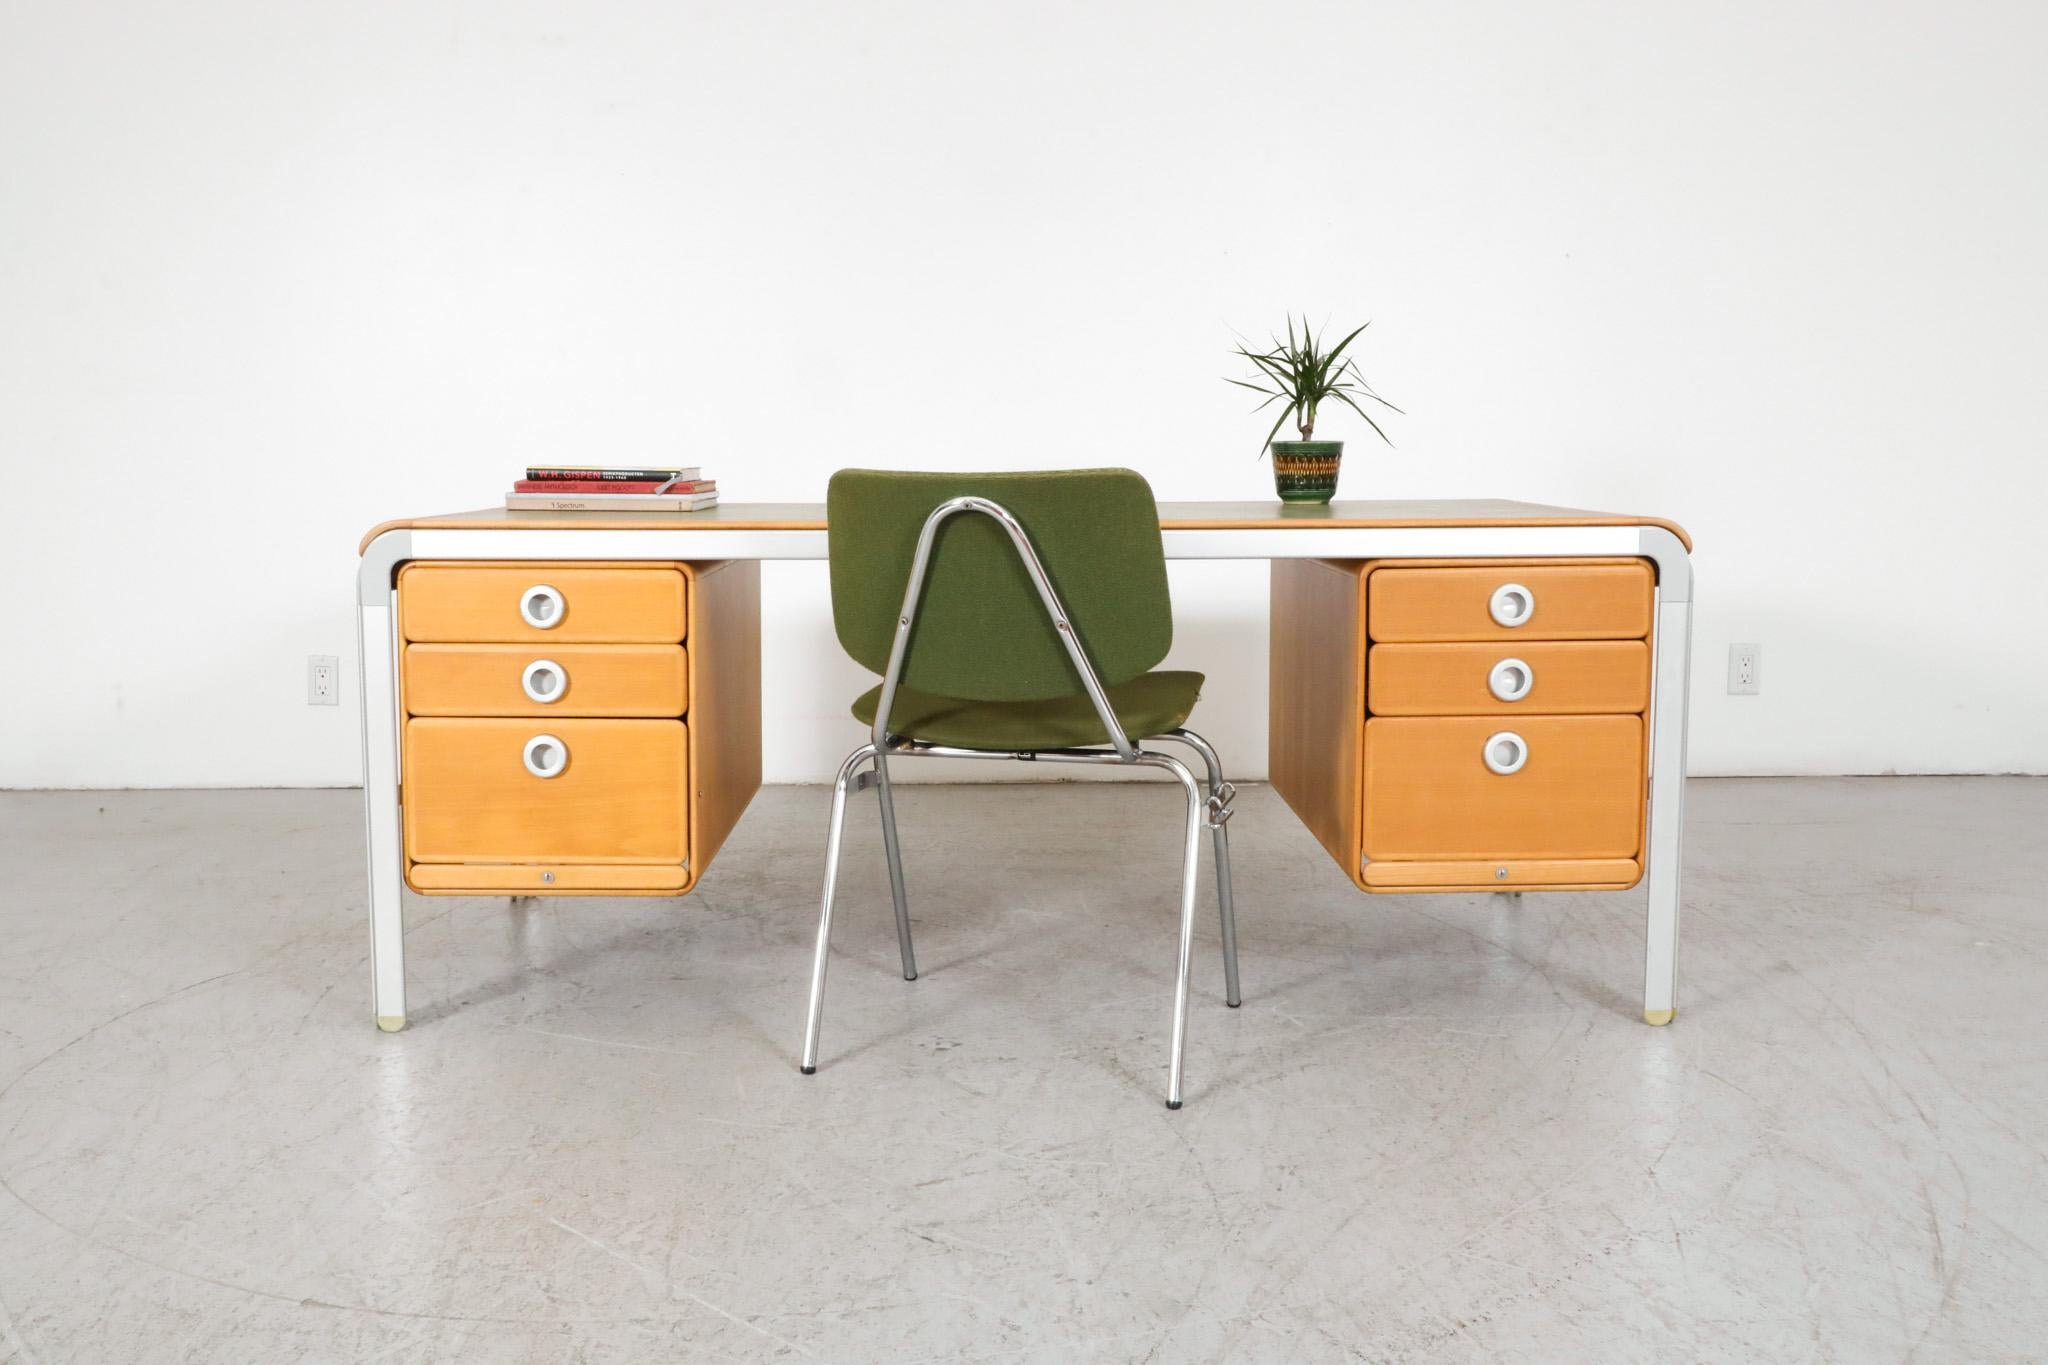 Writing desk designed by Arne Jacobsen in 1971. Part of the 'DJOB' system for Denmark's National Bank. The desk has stacking drawers on both sides and is made of beech wood with an anodized aluminium frame and a green laminate top. In original